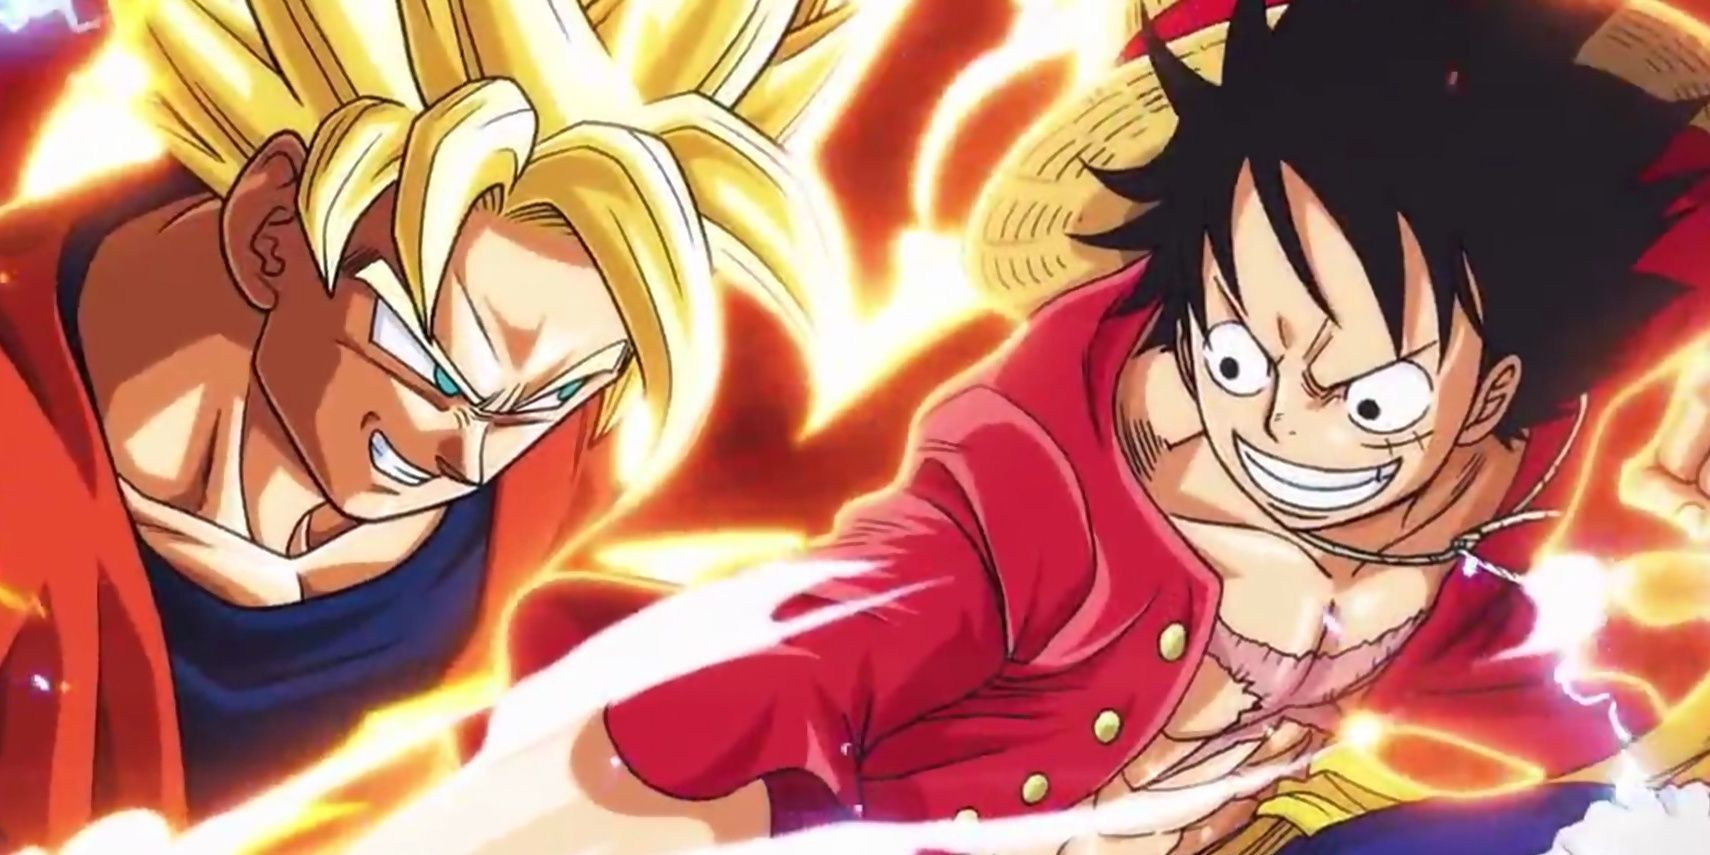 Goku from Dragon Ball and Luffy from One Piece